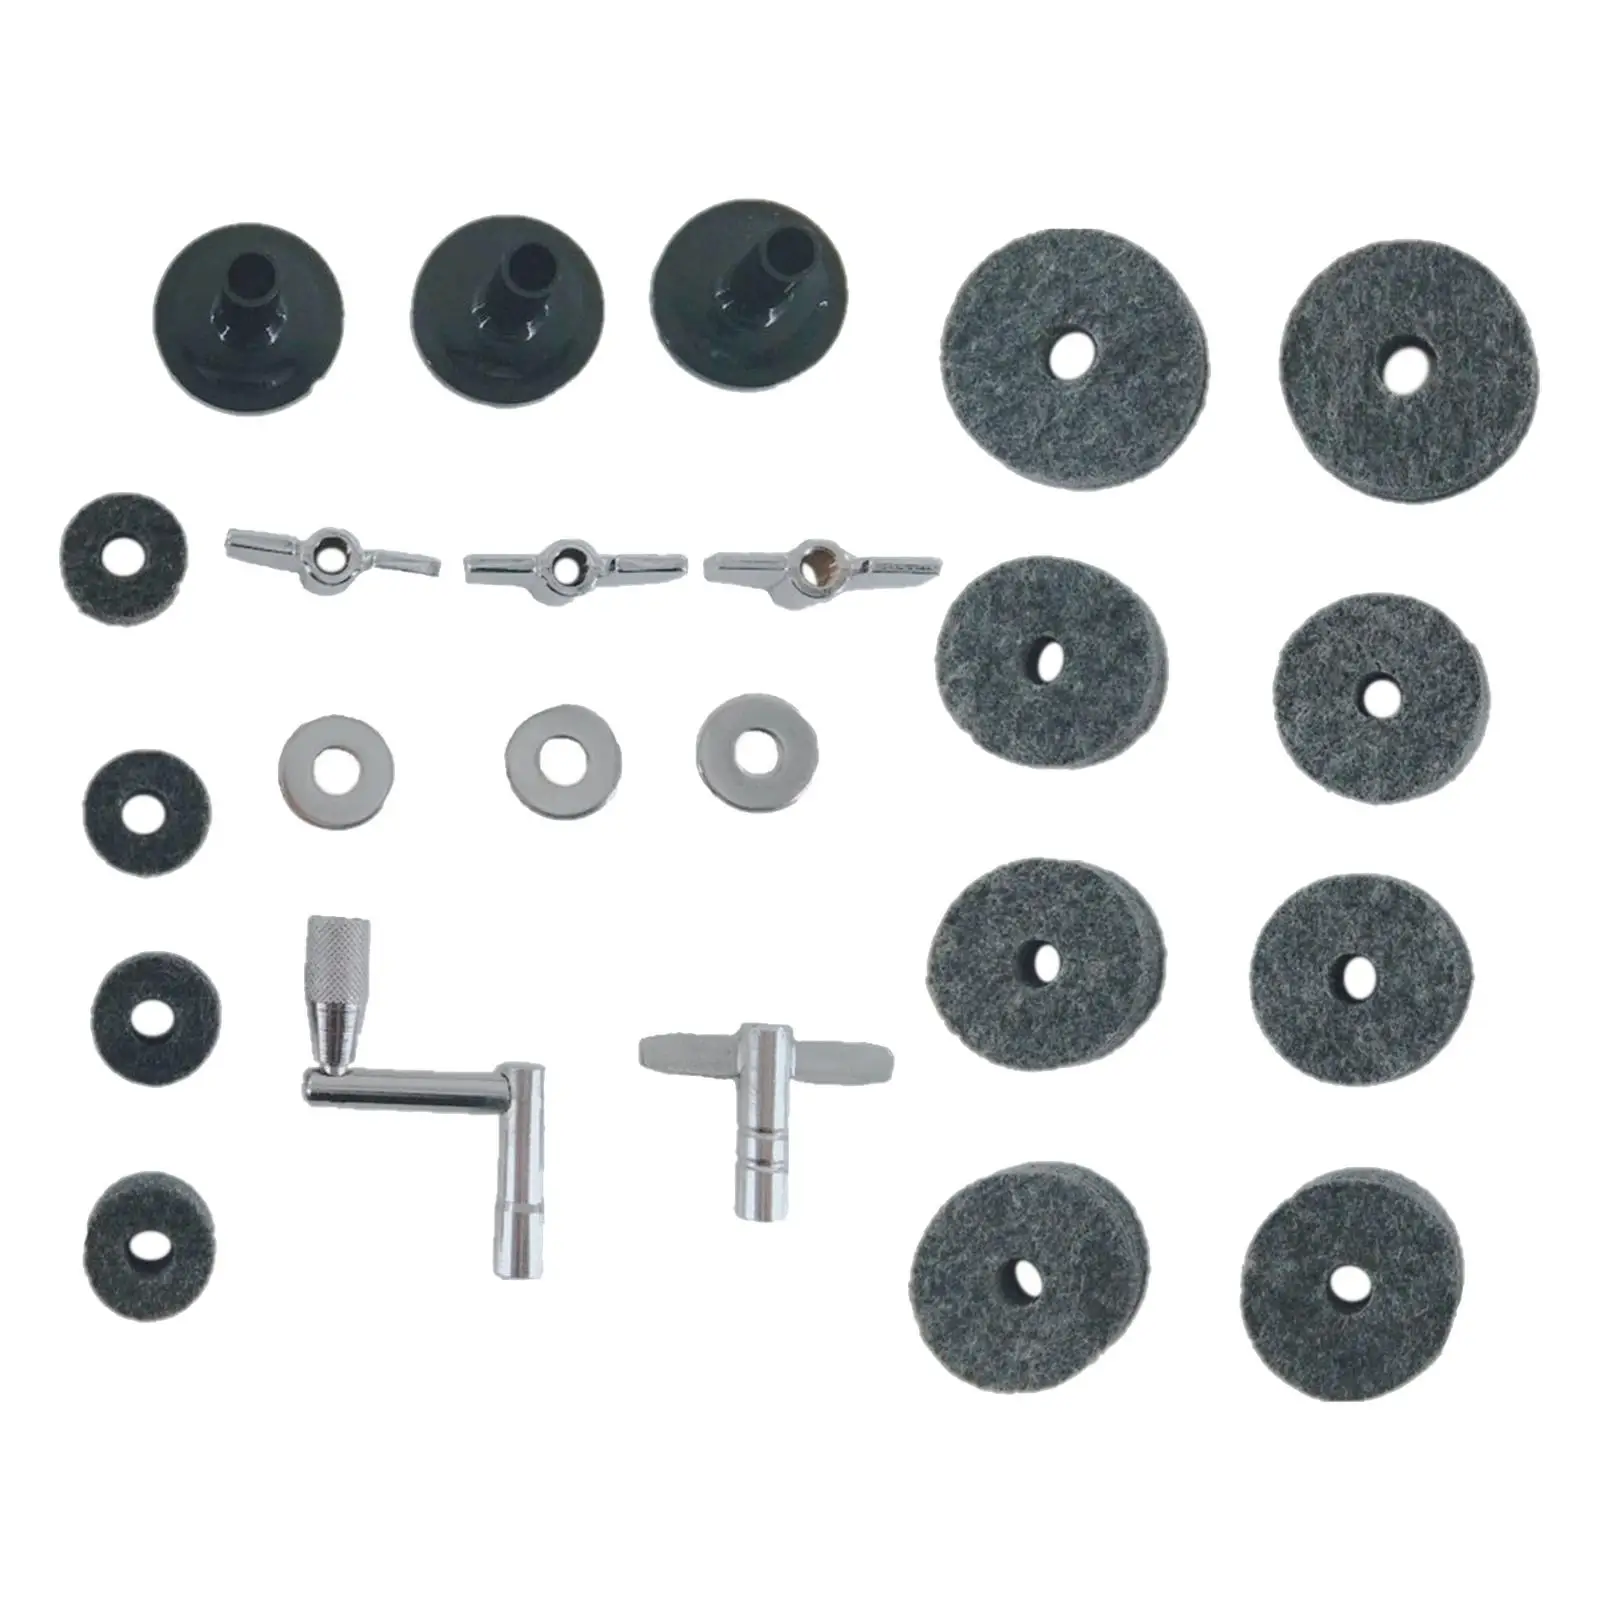 23 Pieces Drum Sets Replacement Cymbal Felts Washers Cymbal Replacement Cymbal Washer Wing Nuts Attachment Replacement Parts